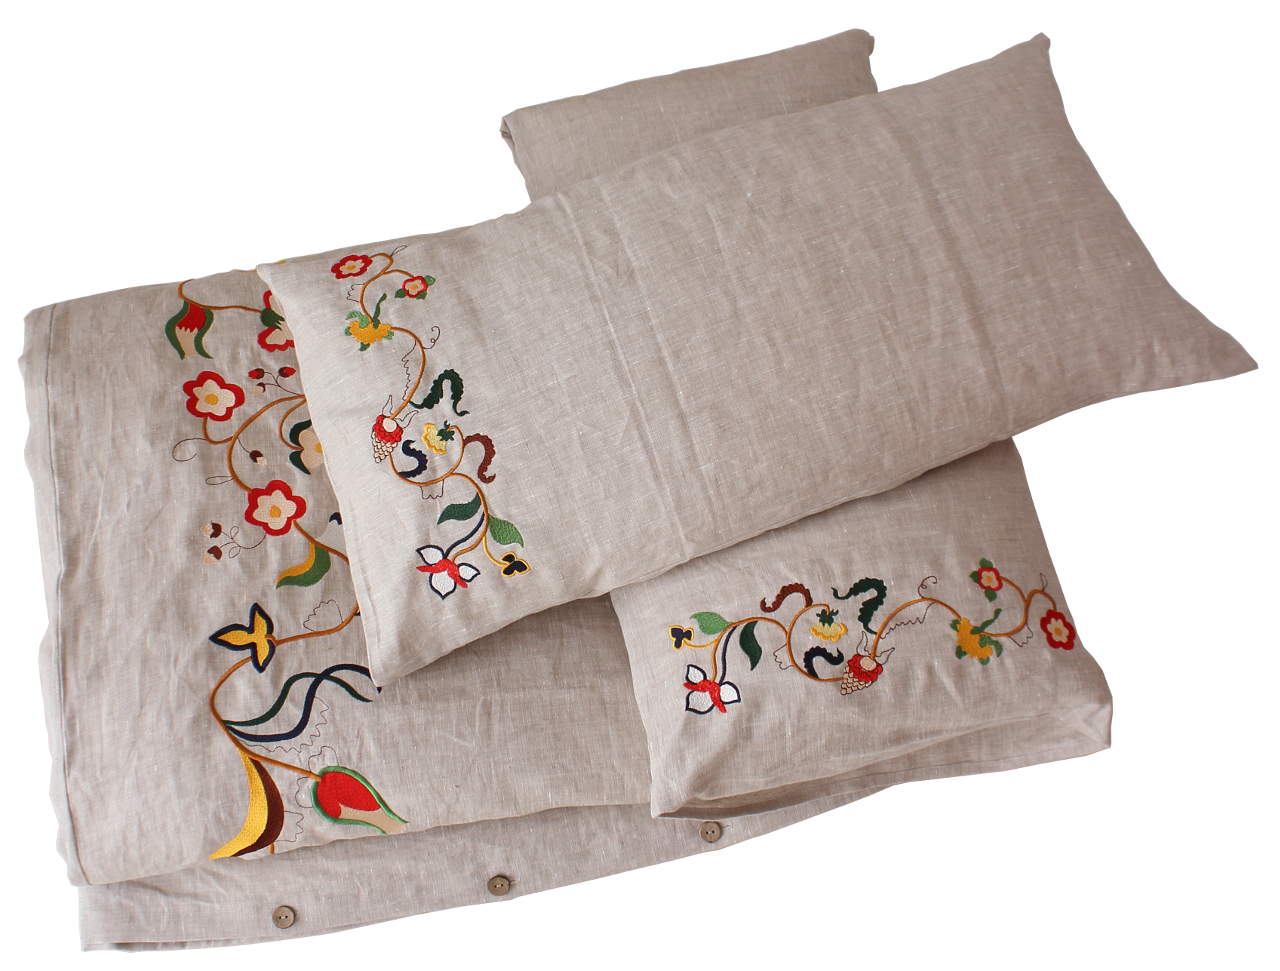 Pure Linen Bedding Embroidered With Historical Ornament